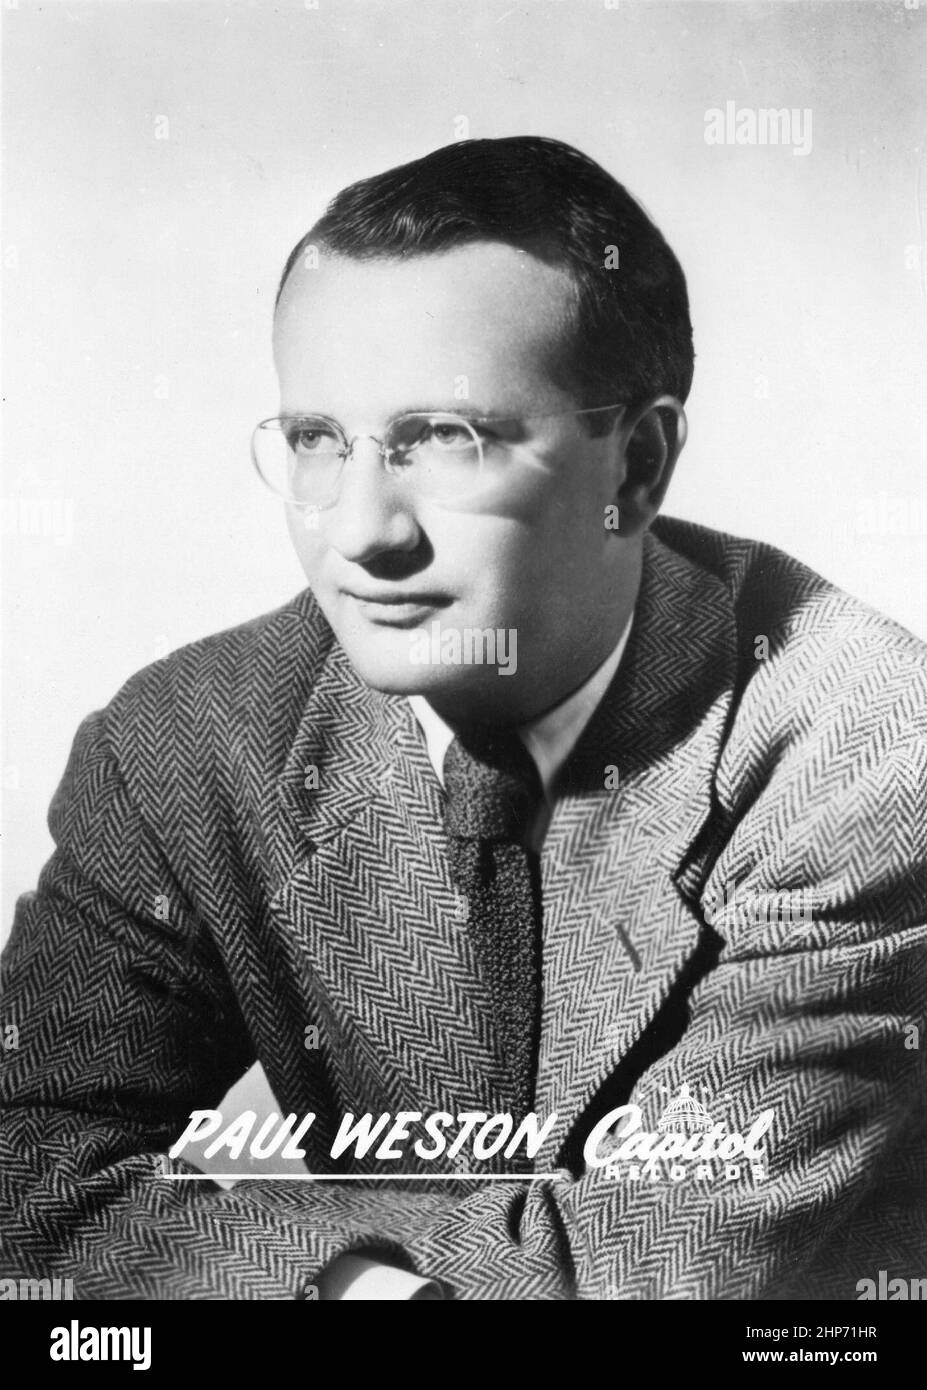 Photo of Paul Weston circa 1940s-1950s from his time as an executive for the newly-formed Capitol Records. Stock Photo